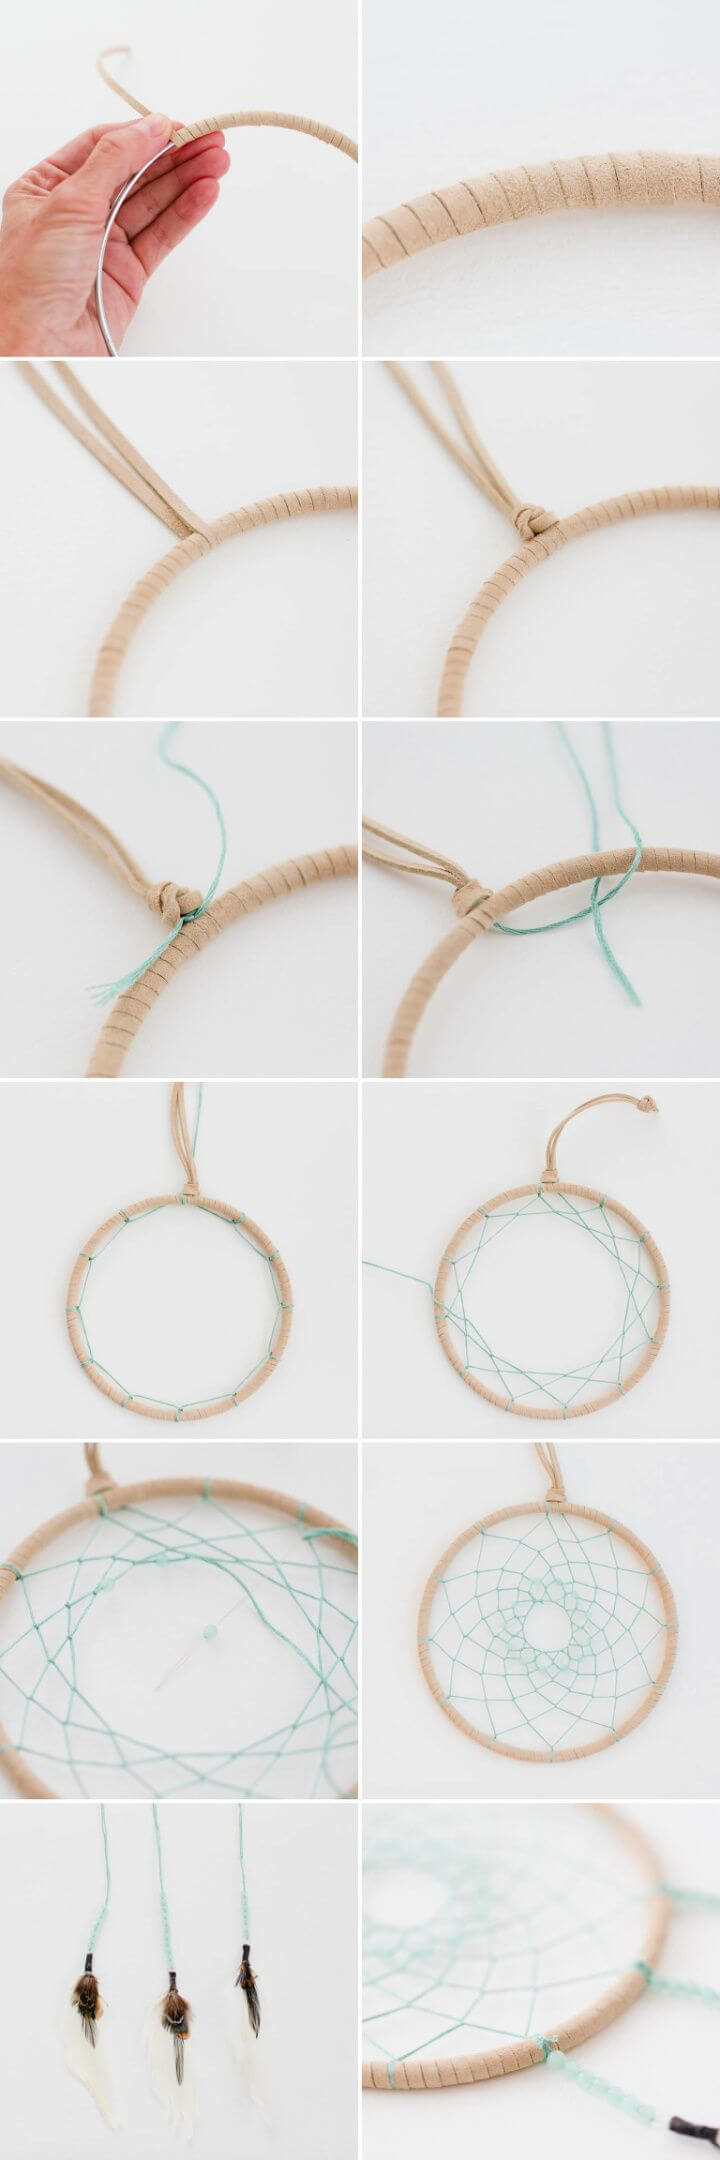 Ribbon Wrapped Hoop and Embroidery Floss Dream Catcher Tutorial